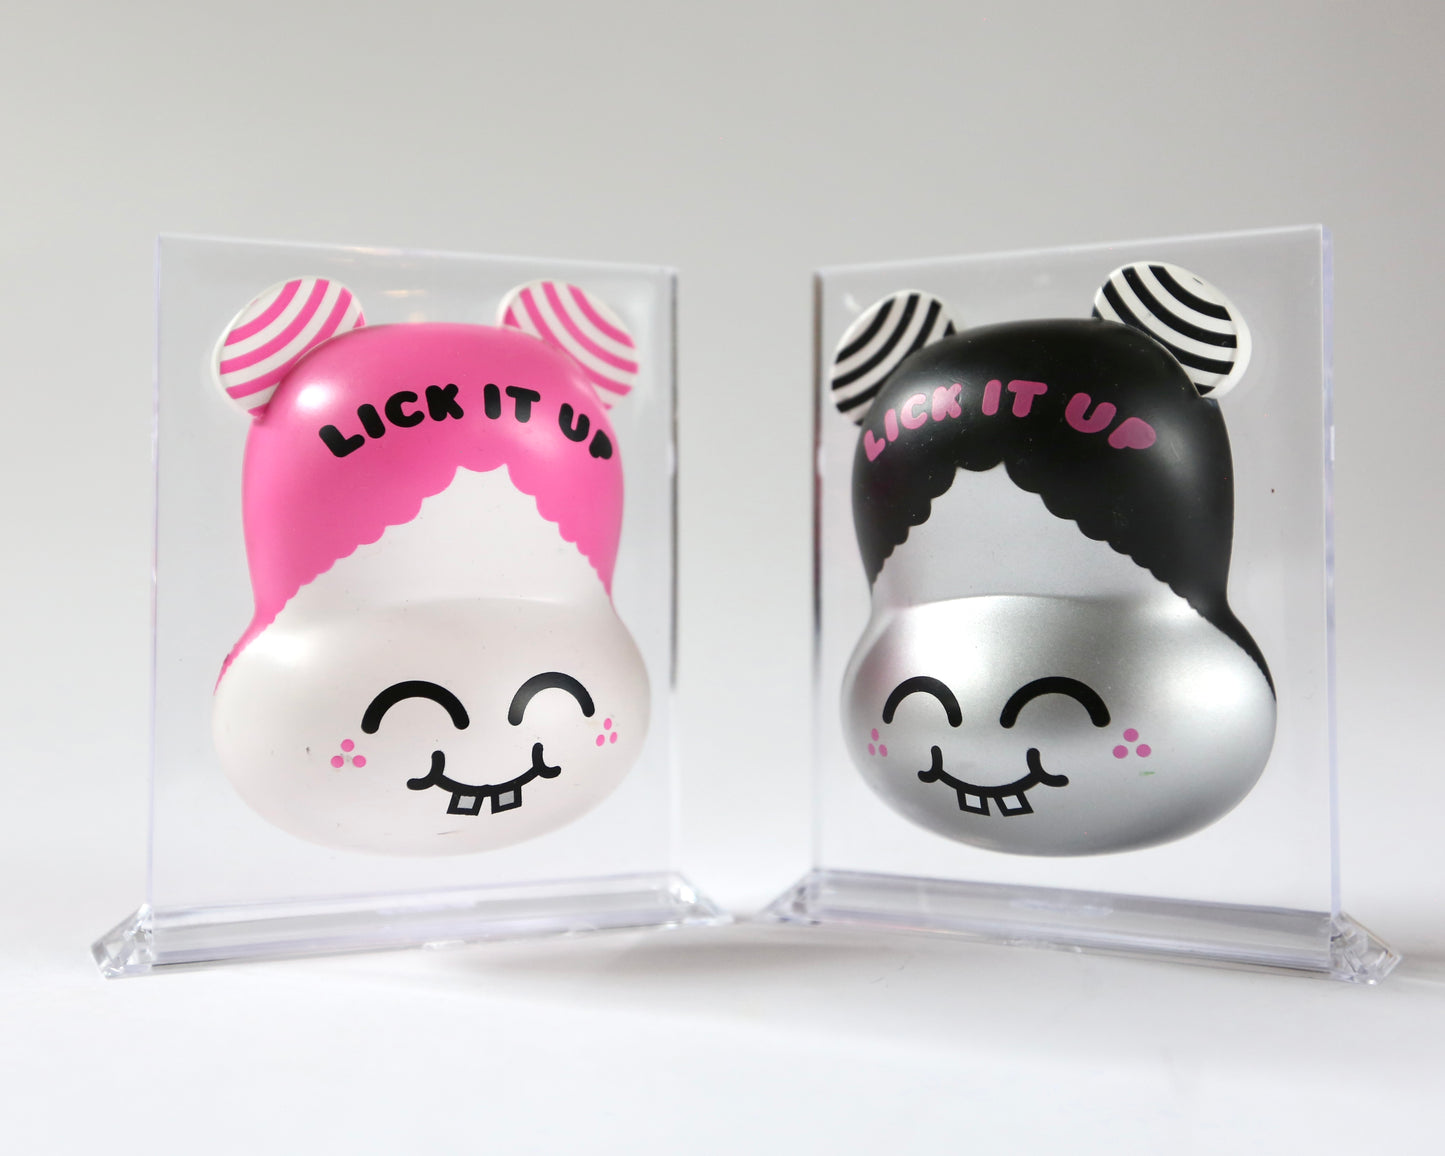 "Lick it Up" Pink + Silver OMI Series 1 by Buff Monster x Munkey King